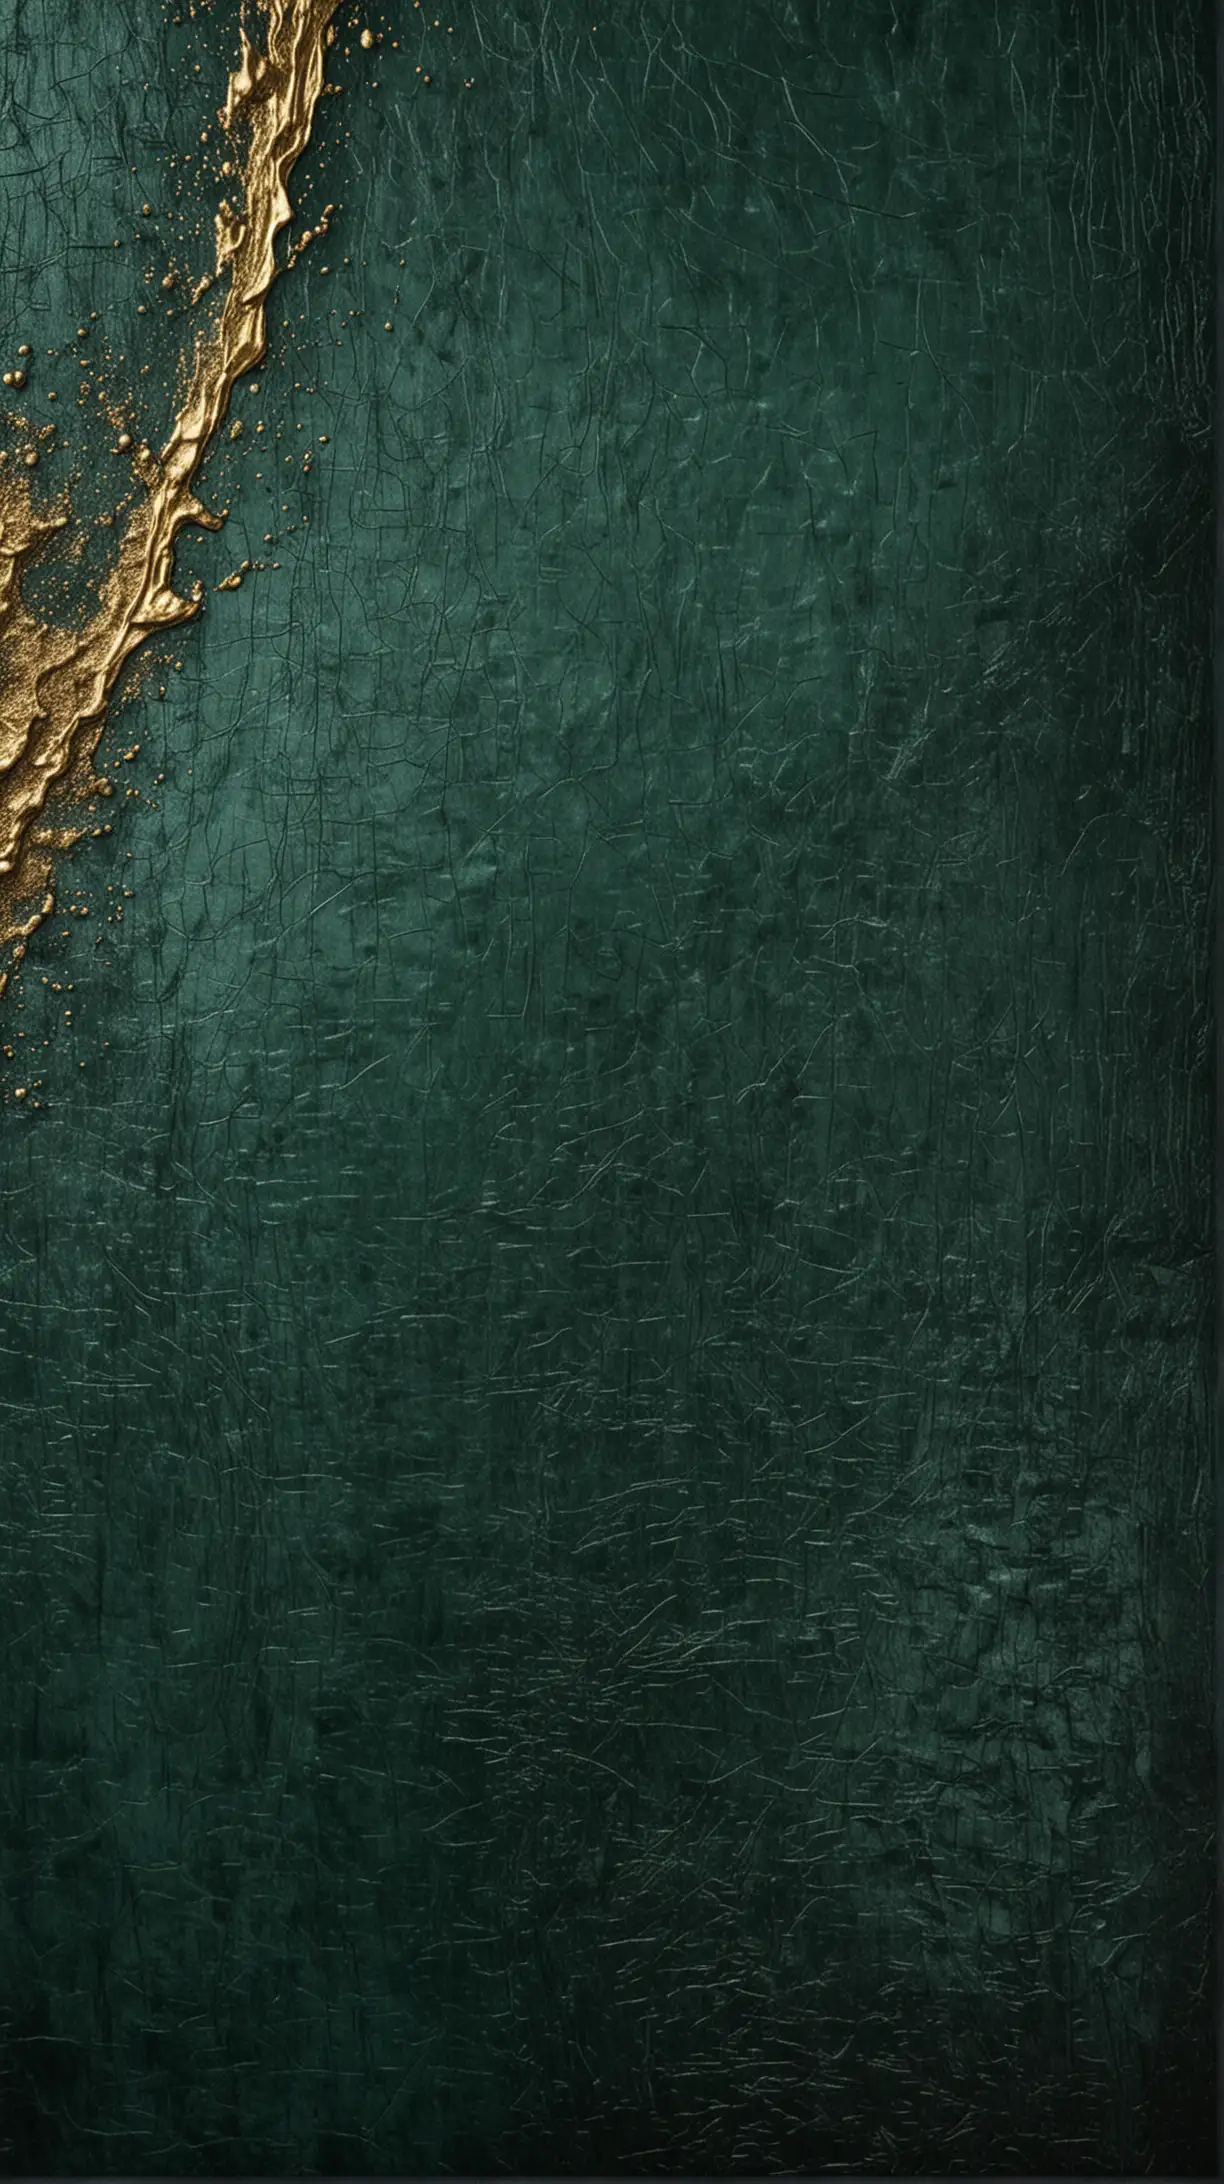 Emerald Green Metallic Textured Abstract Art with Dark Gold Accents on Monochrome Background